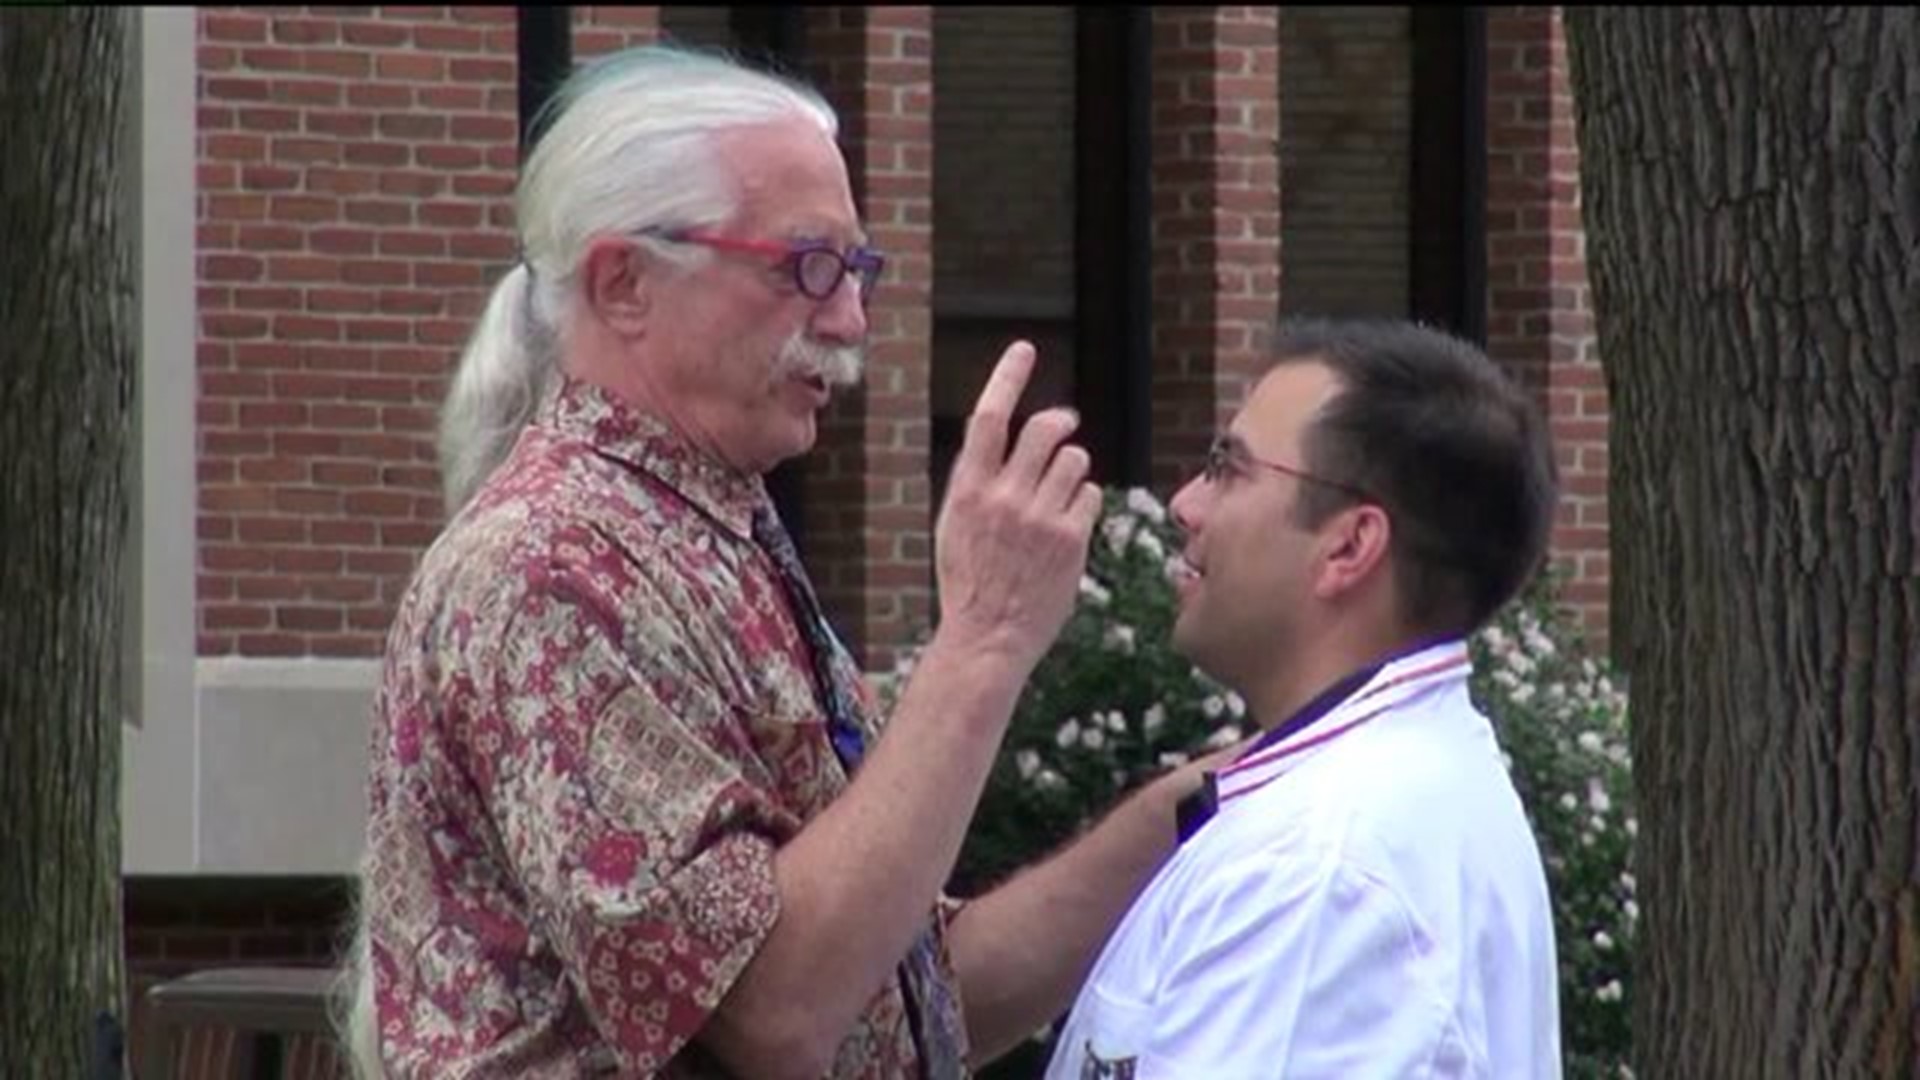 Patch Adams Shares Some Wisdom at Wilkes University